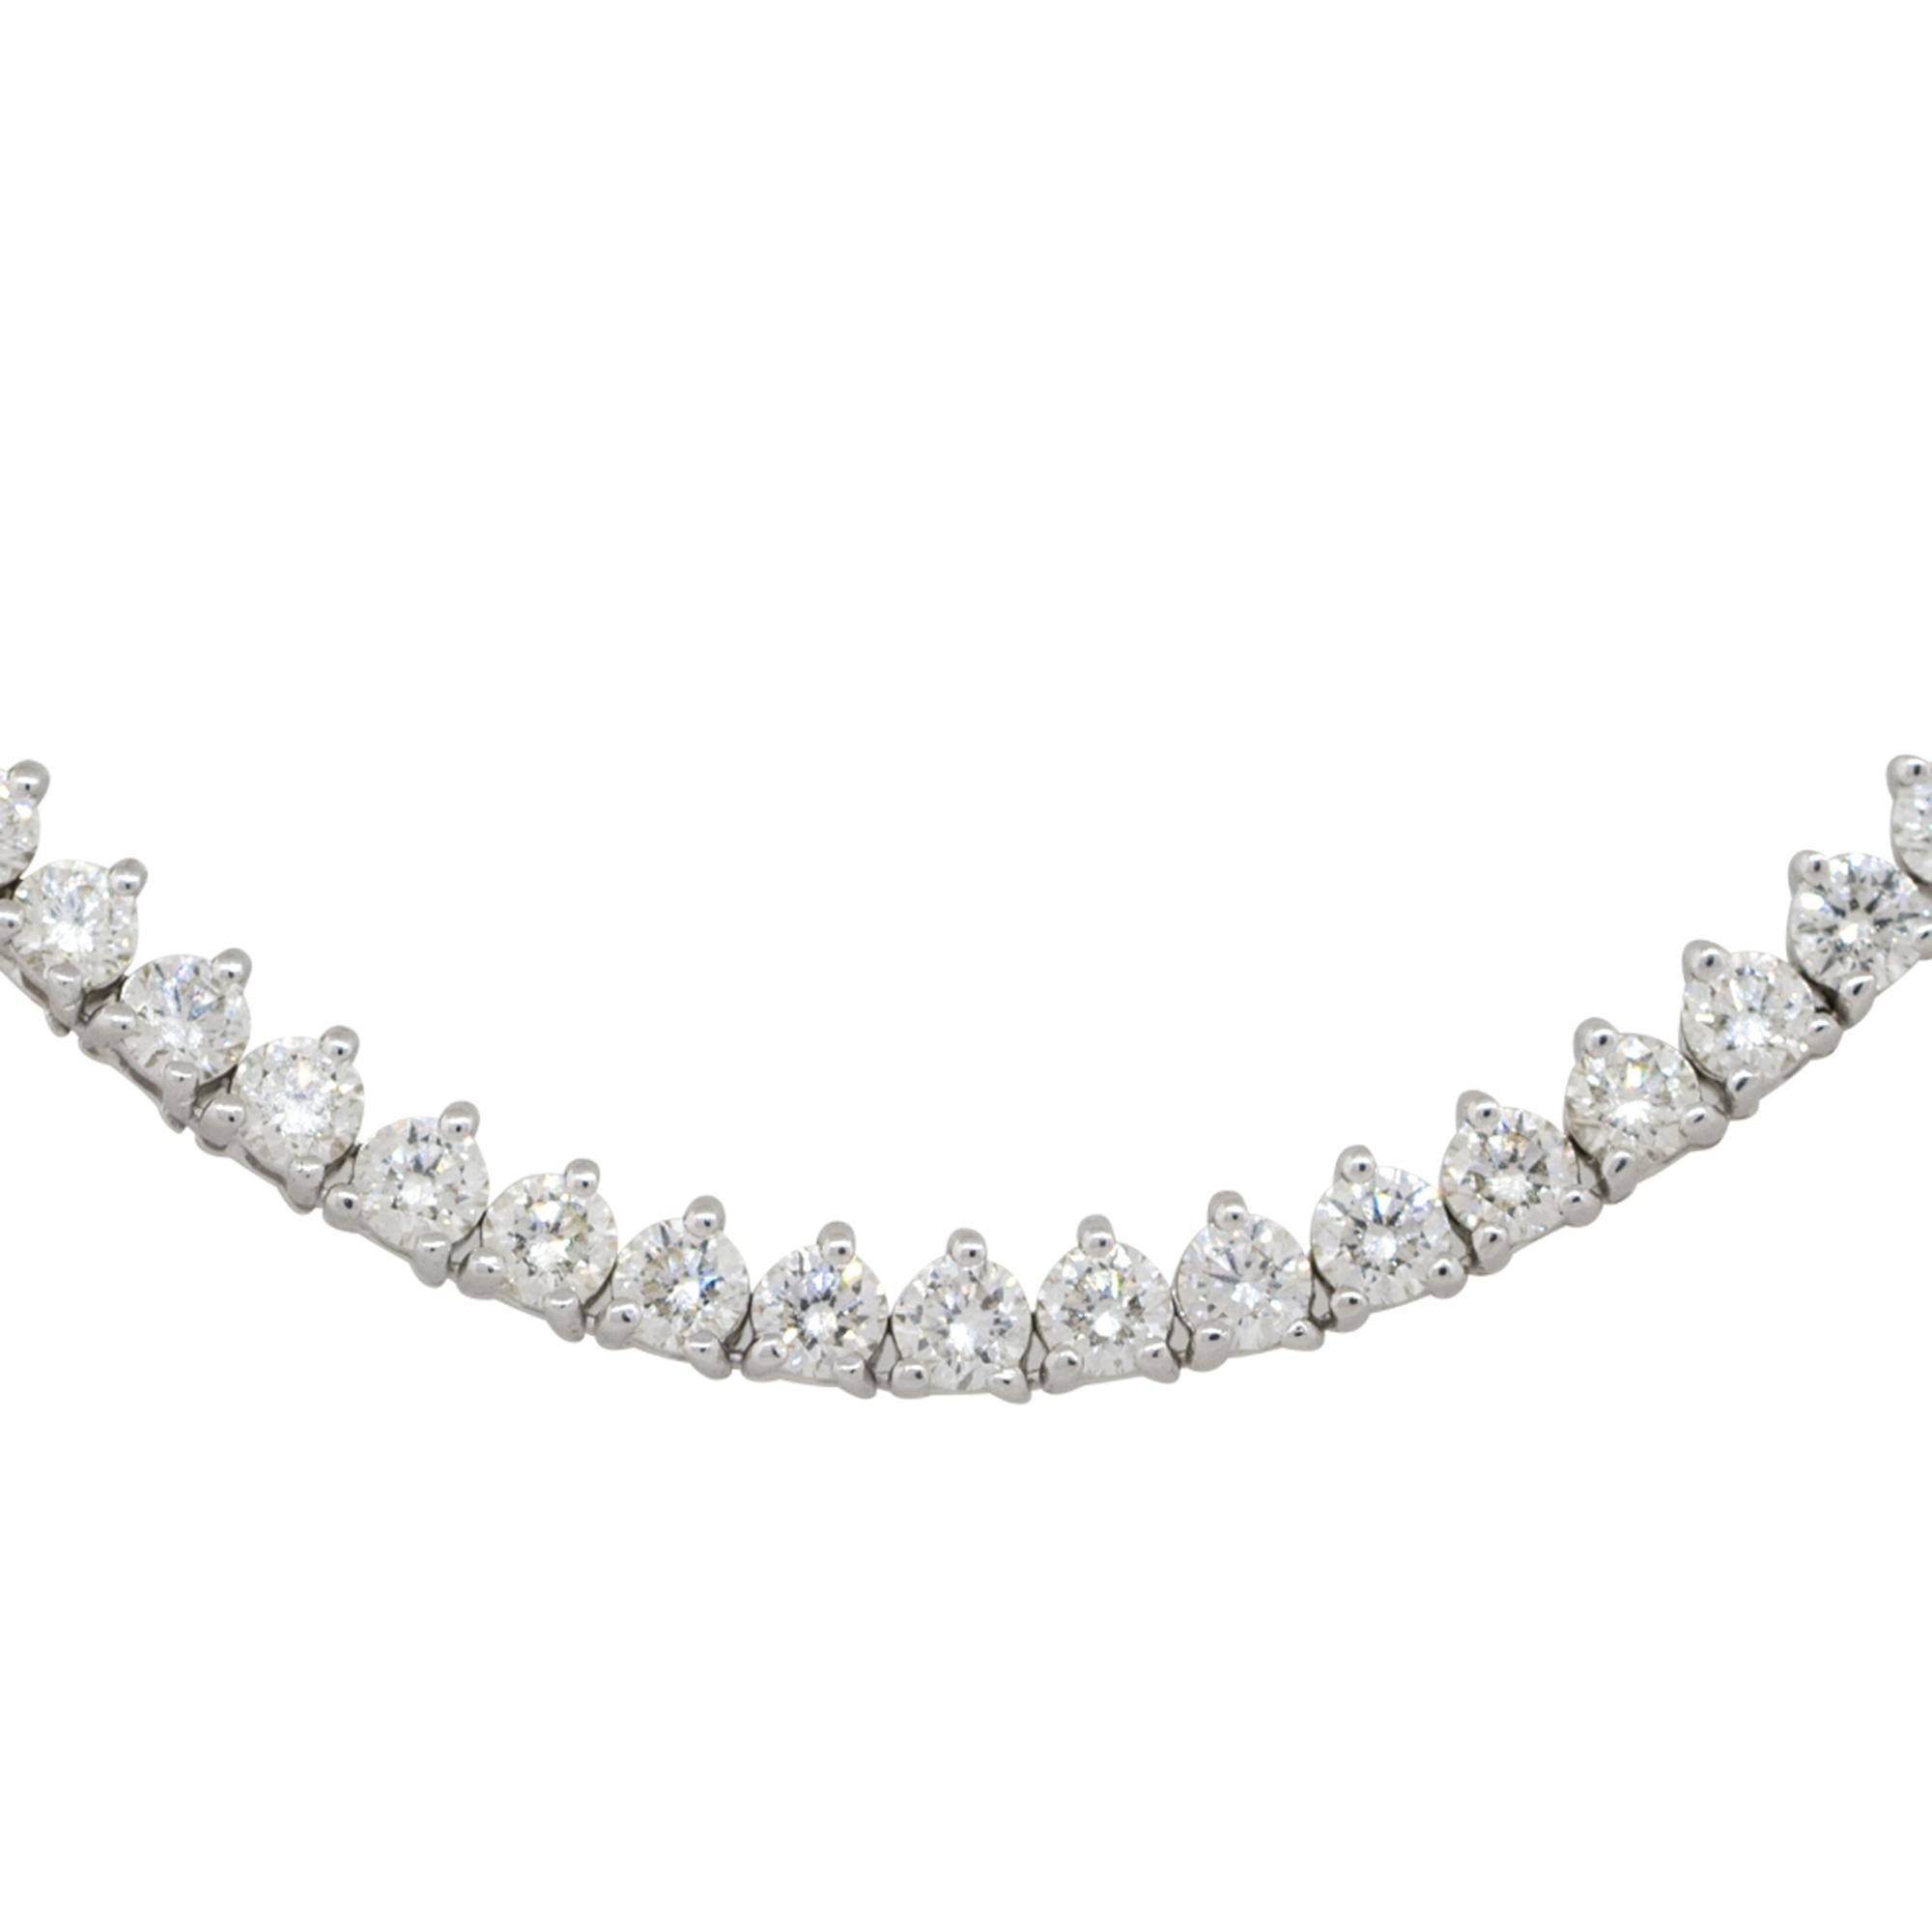 Material: 14k White gold
Diamond Details: Approx. 6.88ctw of round cut Diamonds. Diamonds are G/H in color and VS in clarity
Clasps: Tongue in box with safety clasp
Total Weight: 15g (9.7dwt)
Length: 17